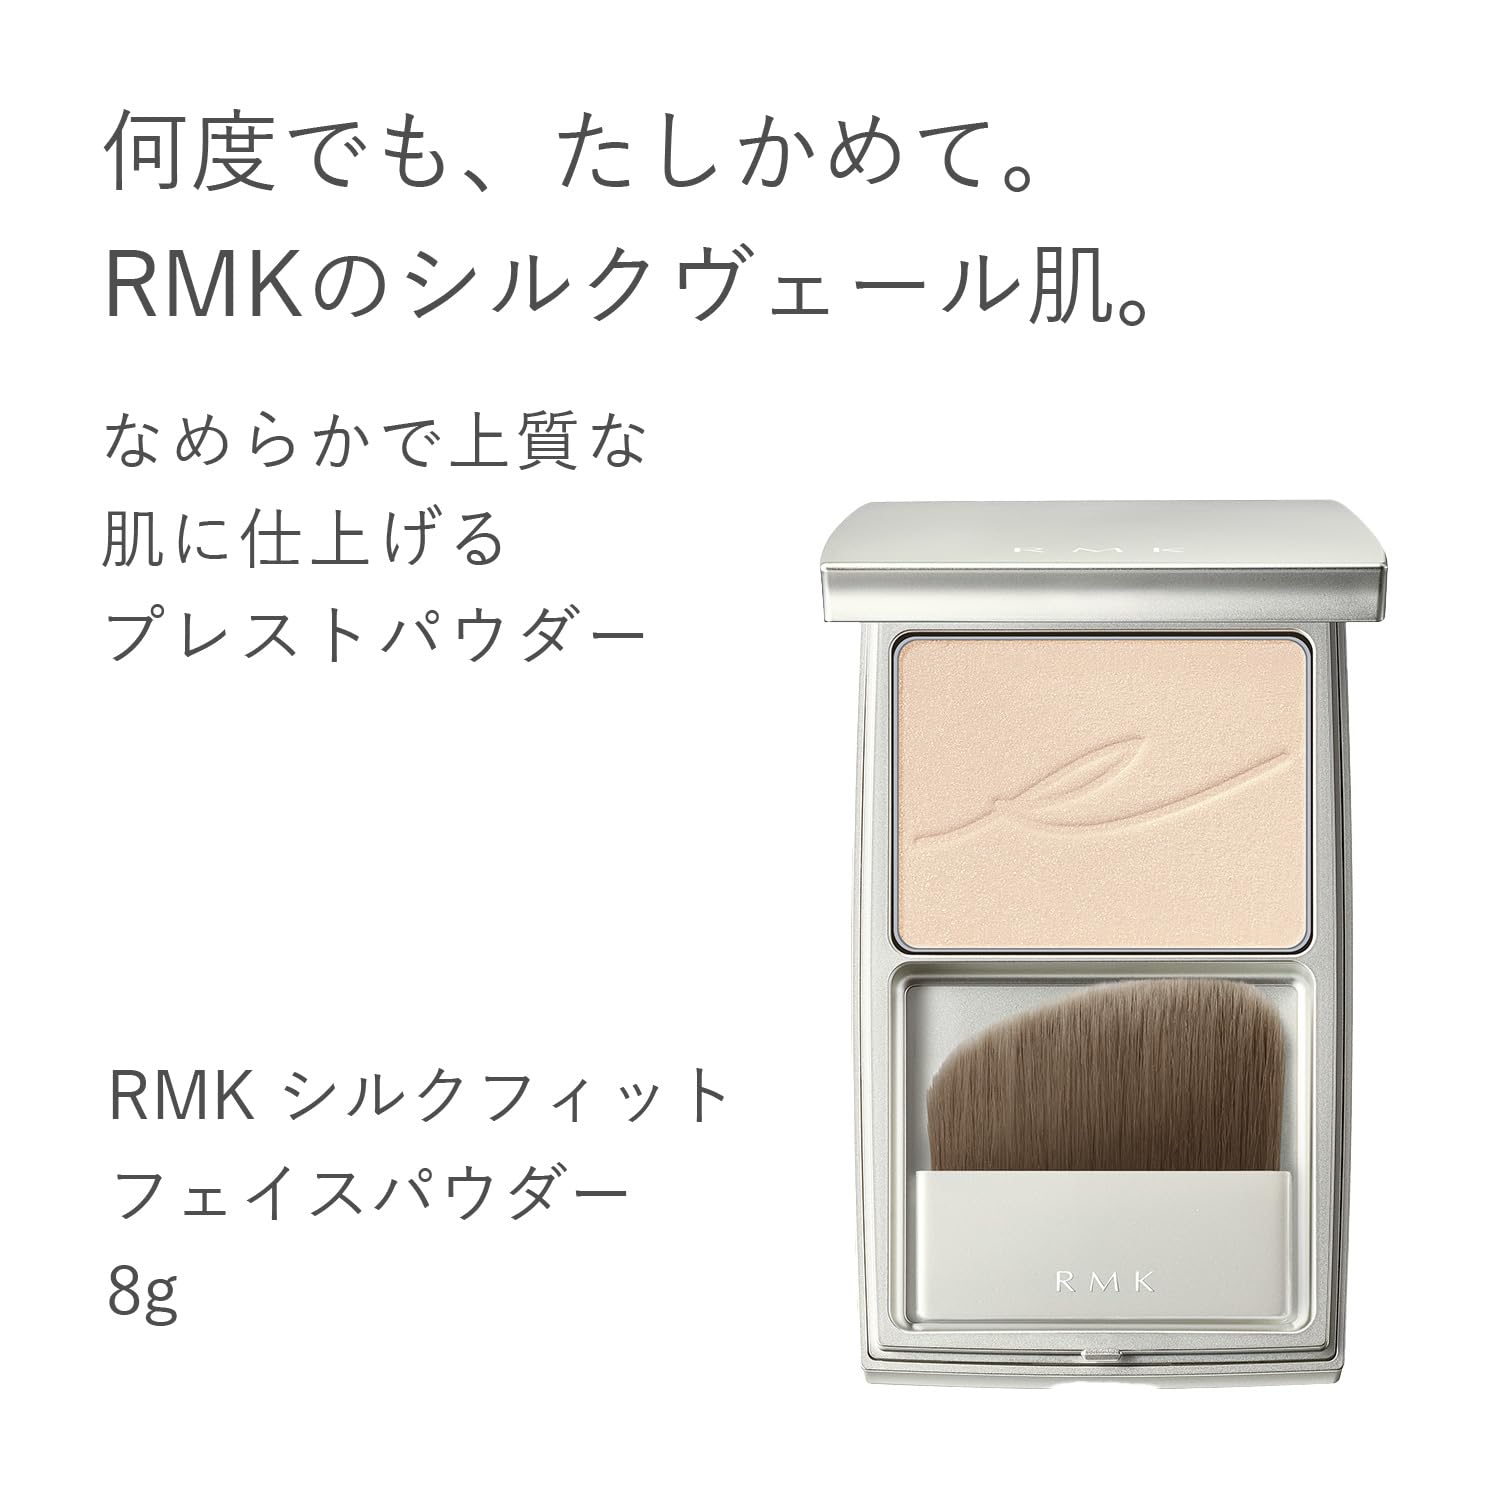 Kate Eye Color Sg604 See-Through Glow and Apricot 1.4grams - Single Pack